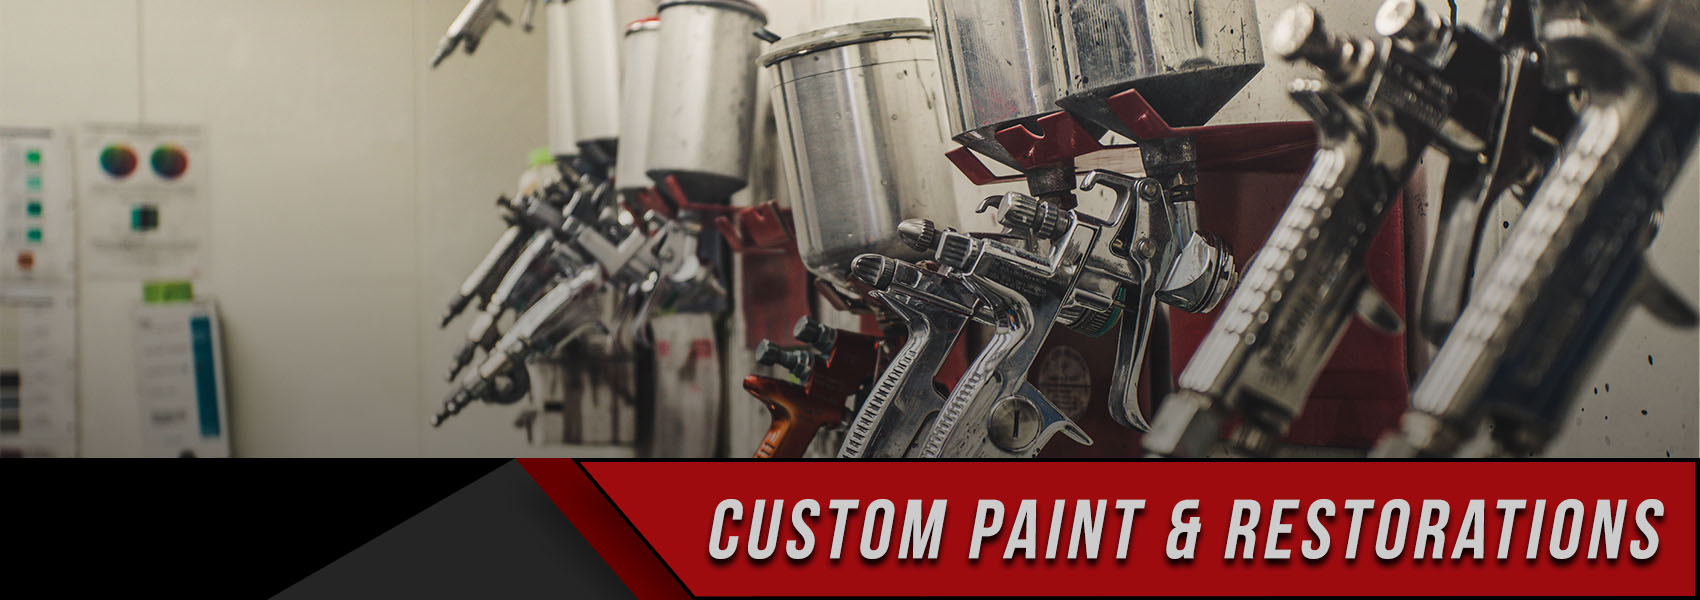 unlimited collision custom paint and restoration header image